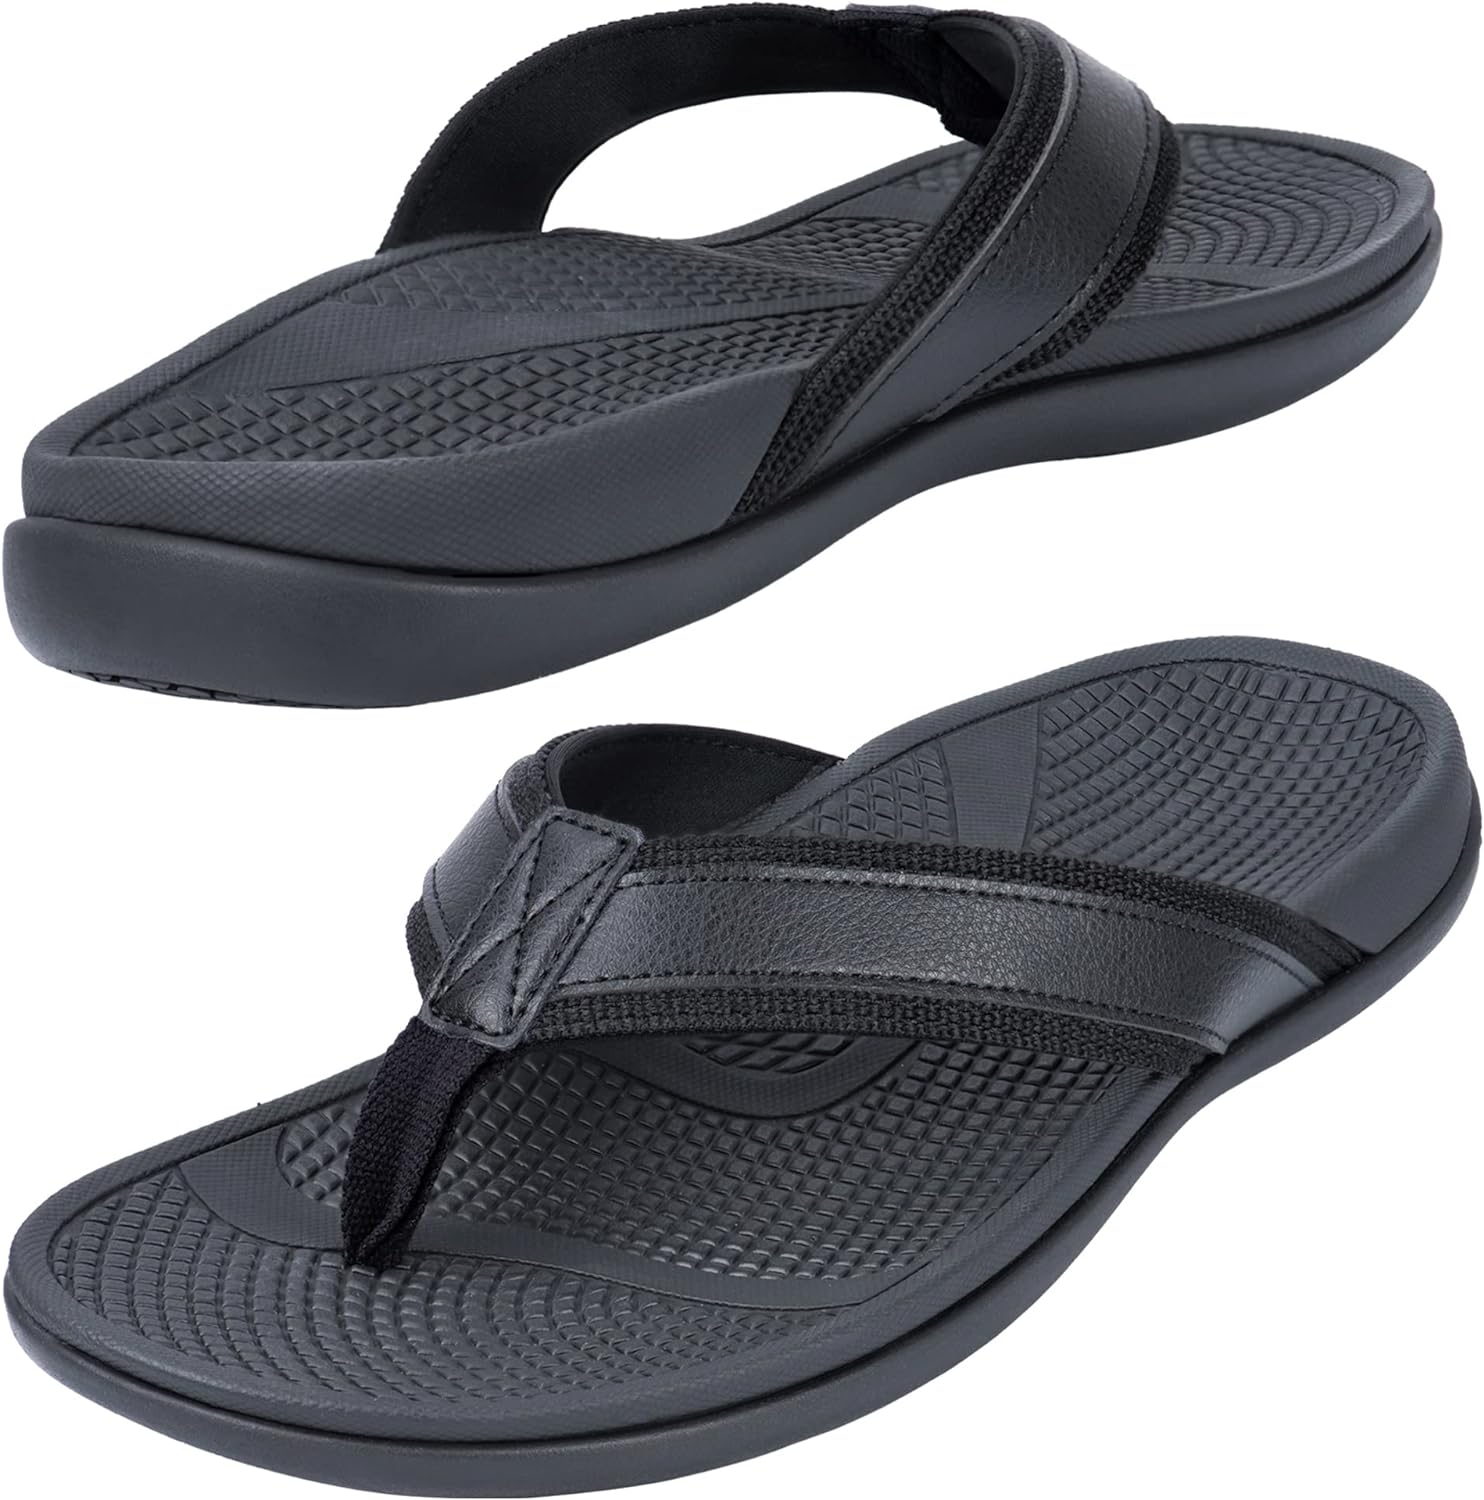 Orthotic Arch Support Flip Flops for Women